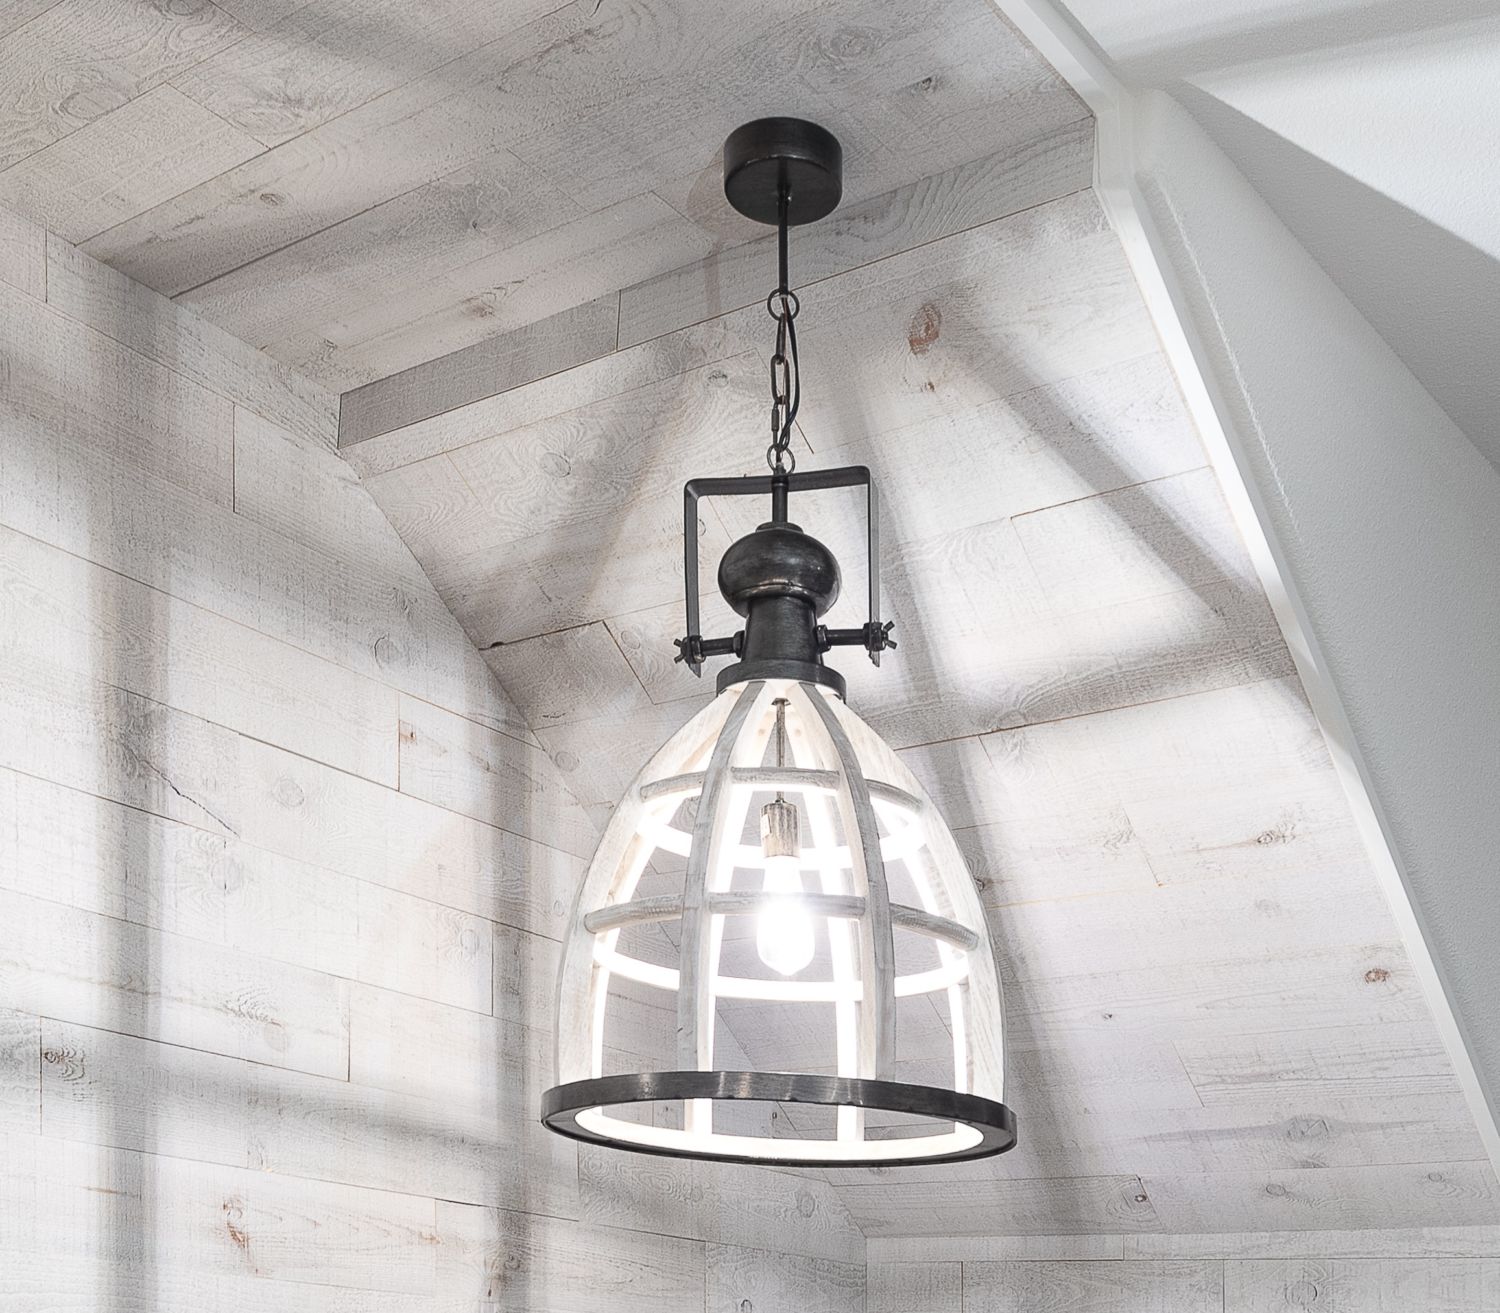 basement-remodeling-contractor-seating-nook-wooden-cage-pendant-light-close-up